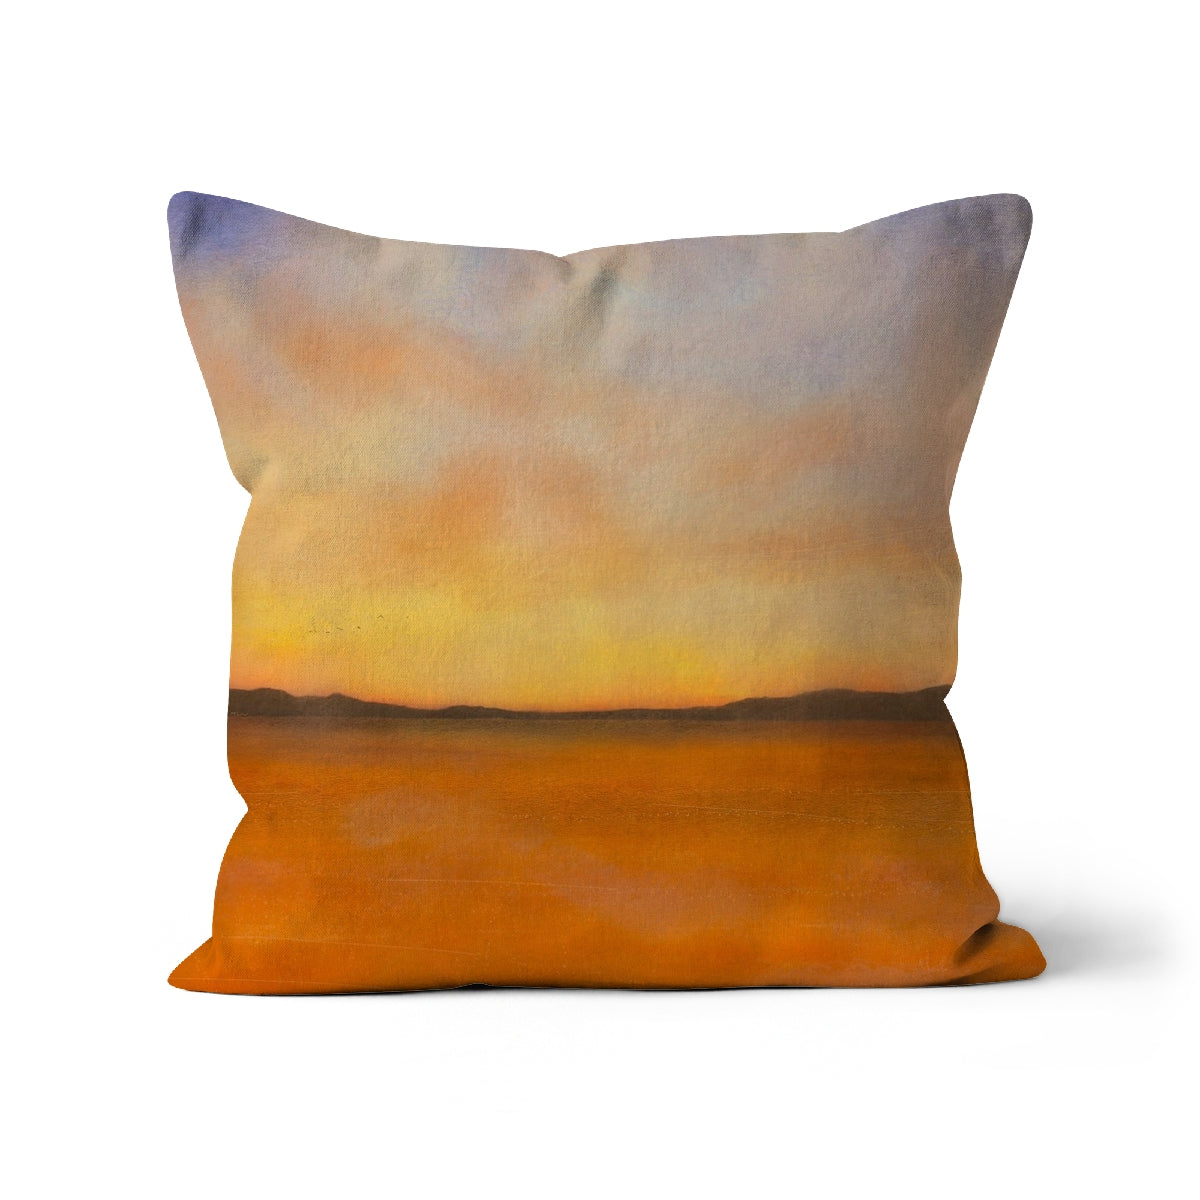 Islay Dawn Art Gifts Cushion-Cushions-Hebridean Islands Art Gallery-Canvas-16"x16"-Paintings, Prints, Homeware, Art Gifts From Scotland By Scottish Artist Kevin Hunter